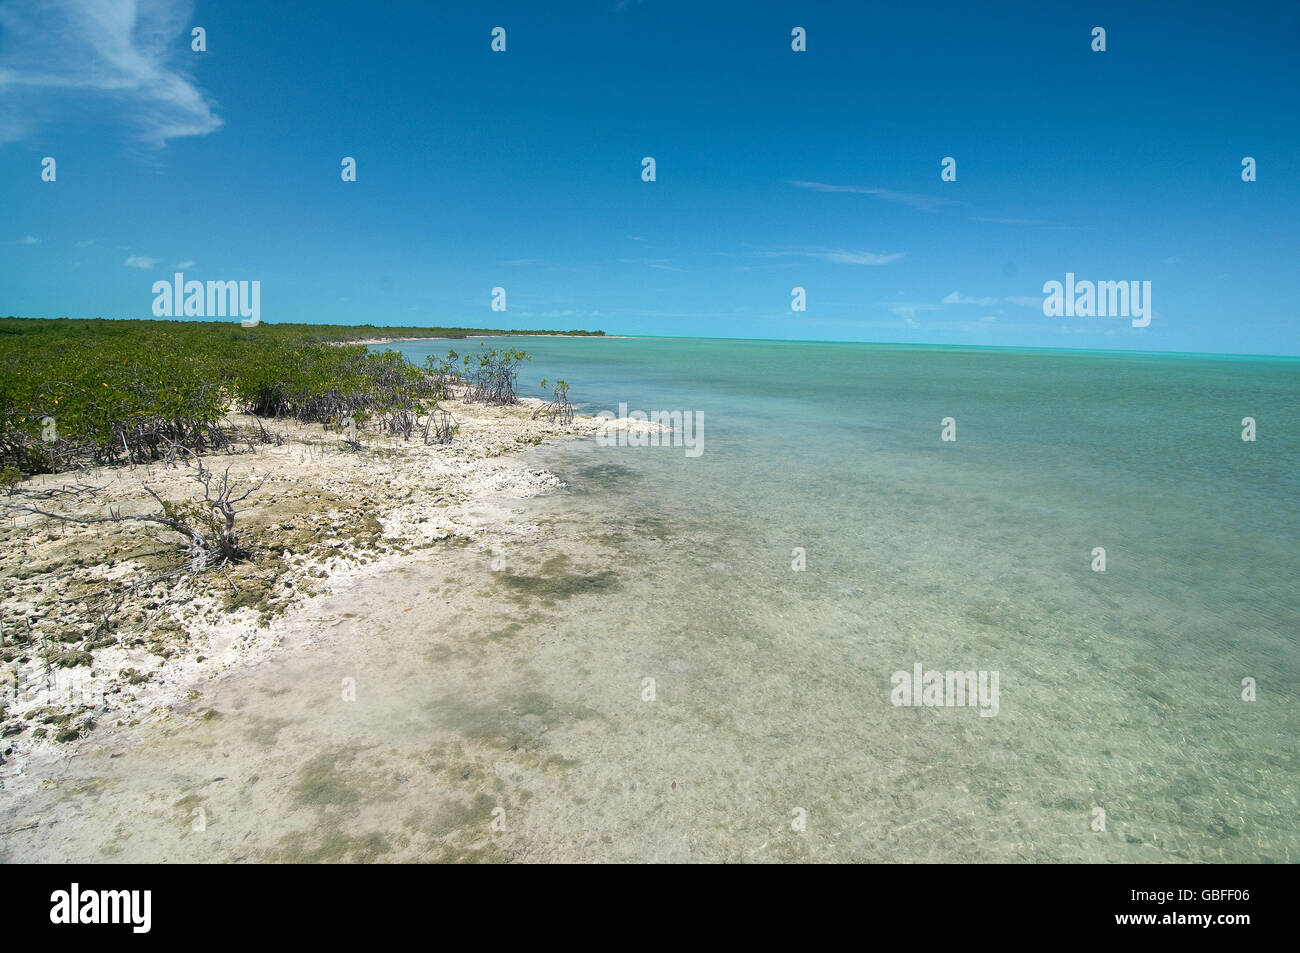 A large bonefish flat at low tide offers plenty of shrimp and blue crabs along the sandy bottom in the Turks & Caicos Islands Stock Photo